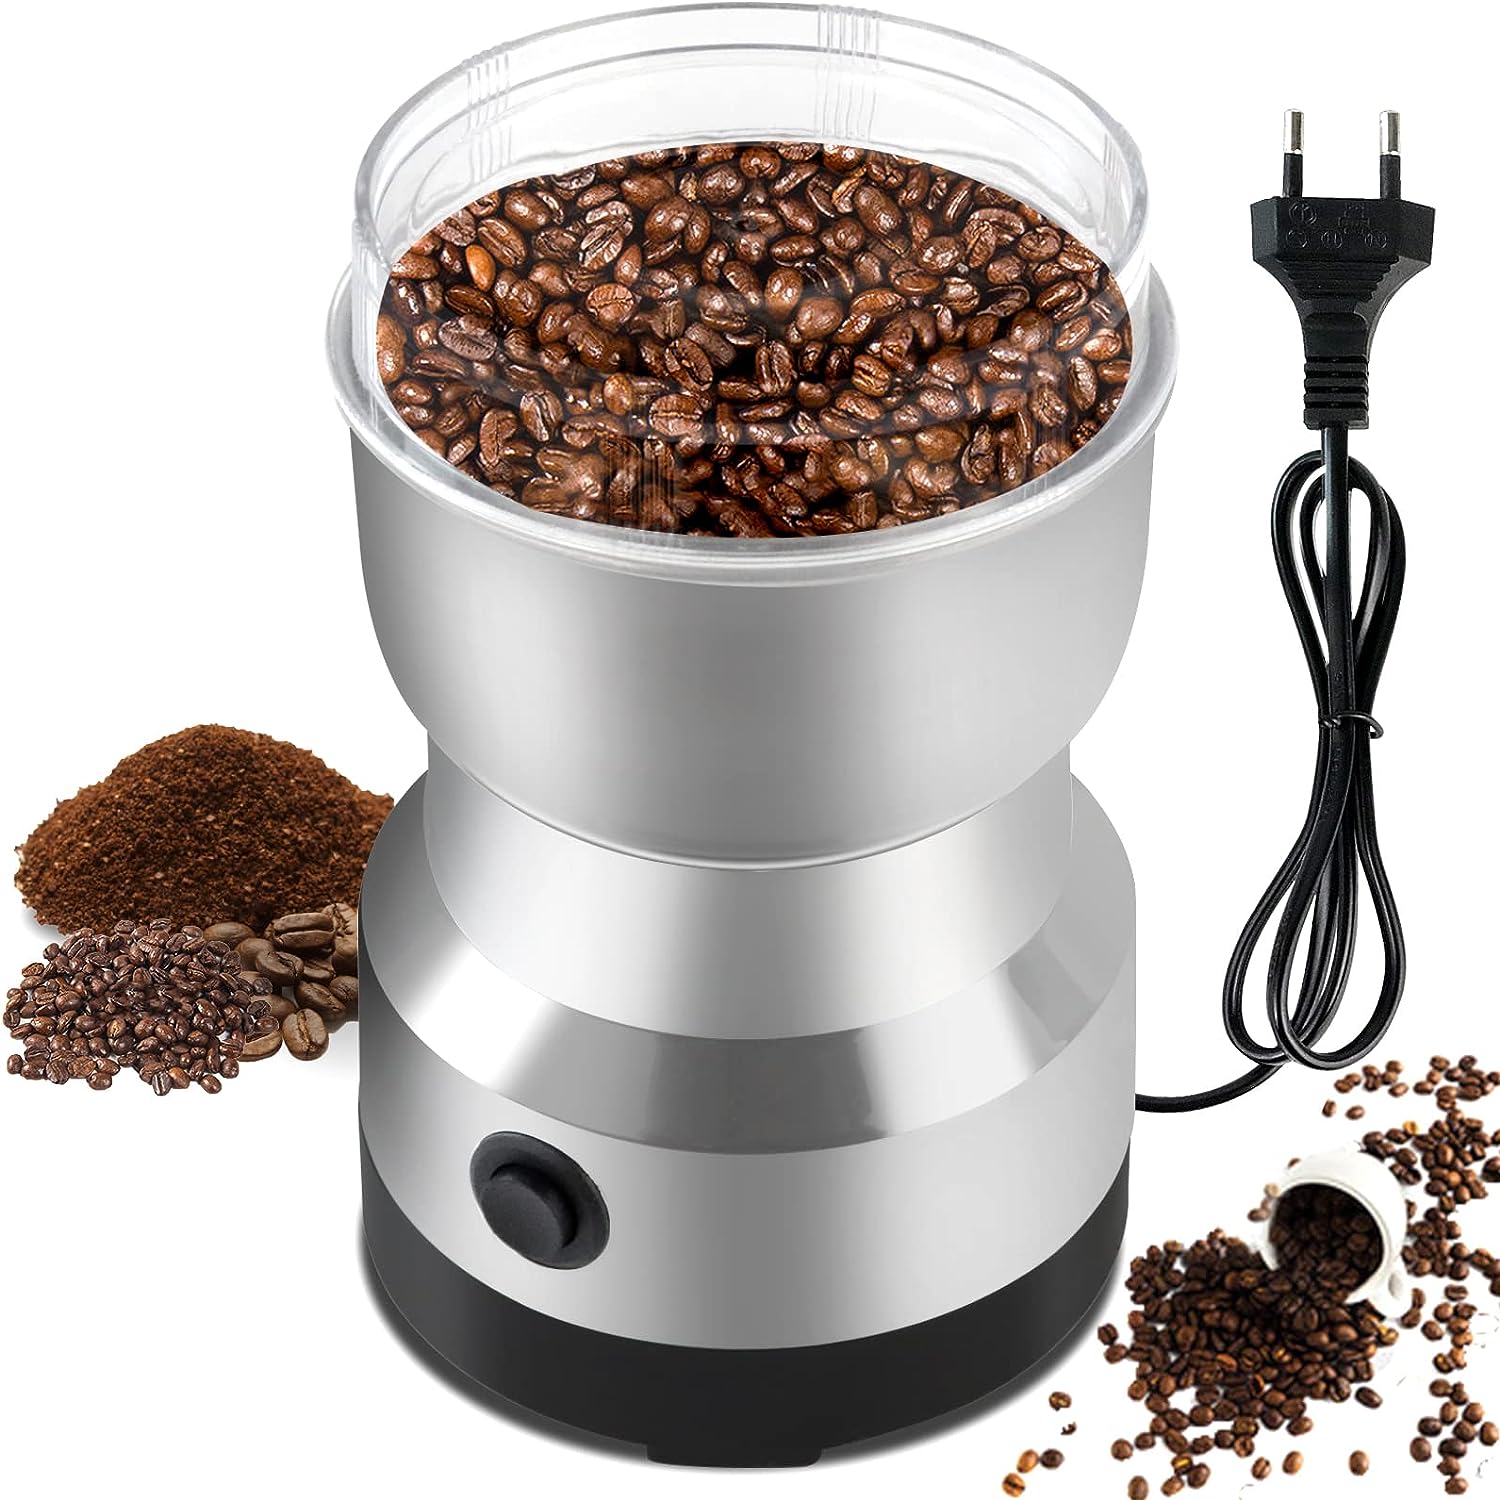 Electric Coffee Grinder 200w Electric Coffee Grinder Capacity 300ml 4 Stainless Steel Blades Spice Mills for Seeds, Spices, Fruits, Dry (Silver)